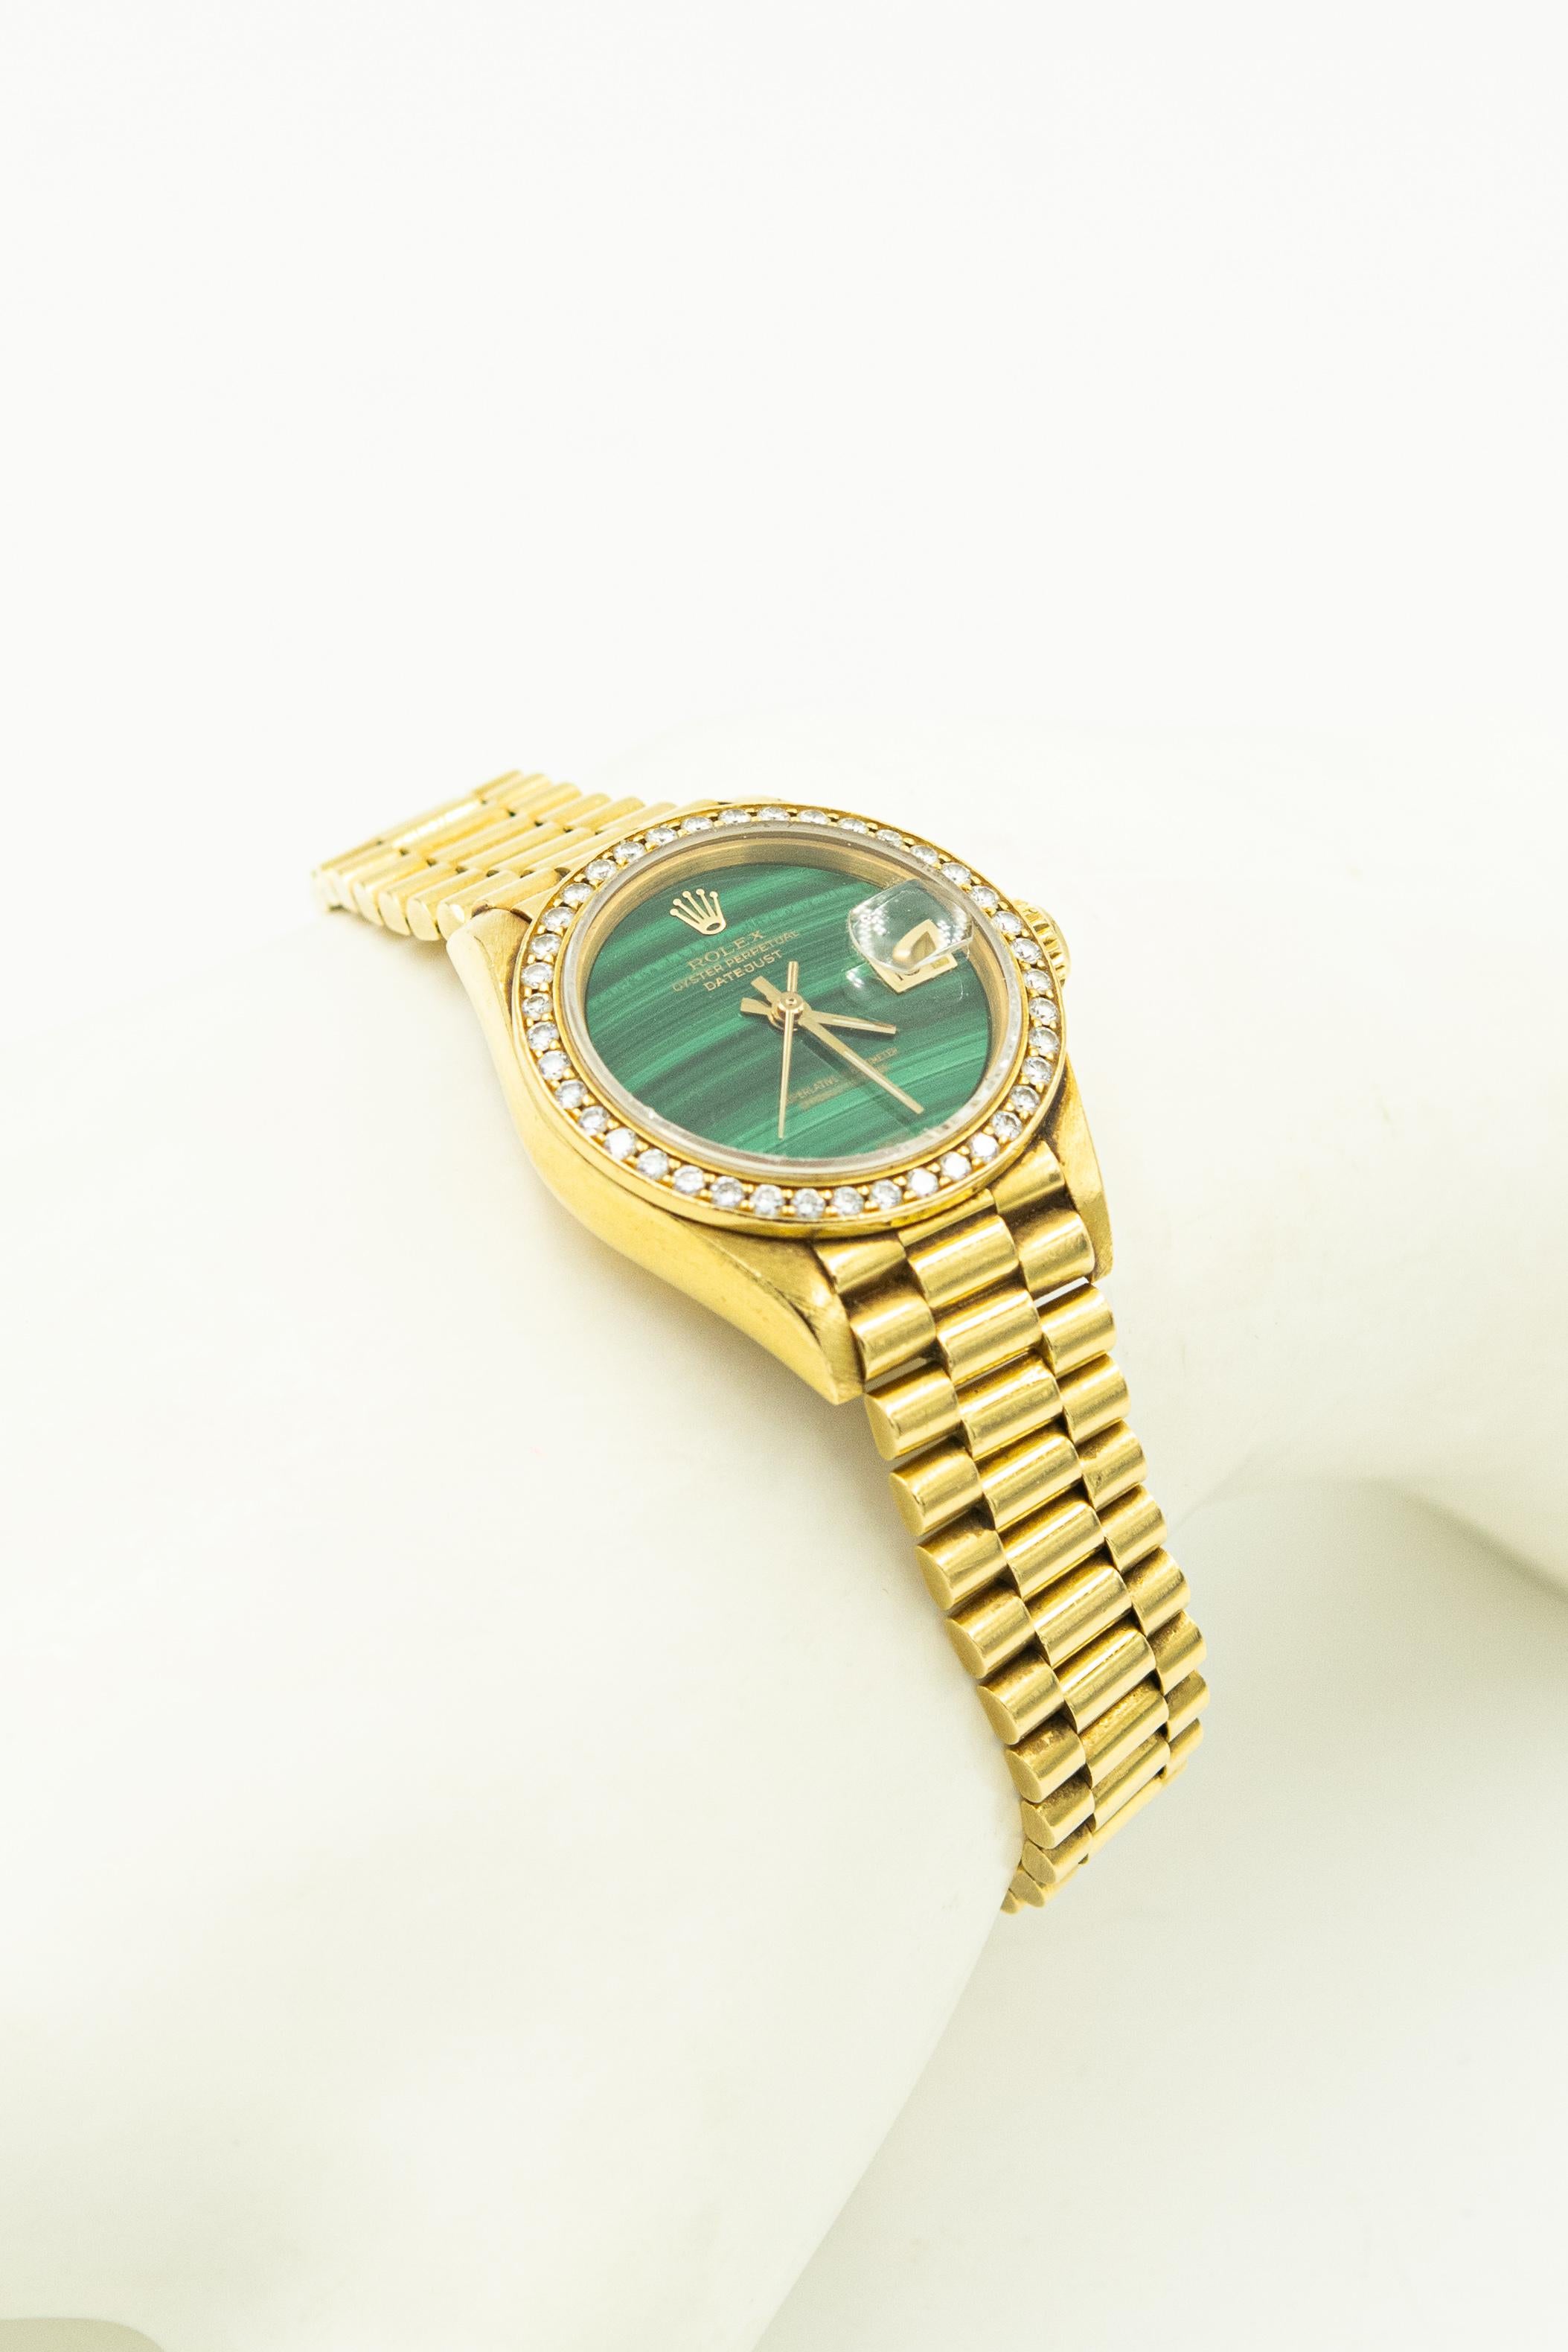 Rolex Ladies 18k Datejust Watch Reference 69178
Serial # R441.261. Malachite Dial 18k and Diamond Bezel with 40 fine white diamonds. 
18k Yellow Gold with 18k Yellow Gold President Bracelet. 
Automatic self-winding, 26mm deployment clasp.
Working
